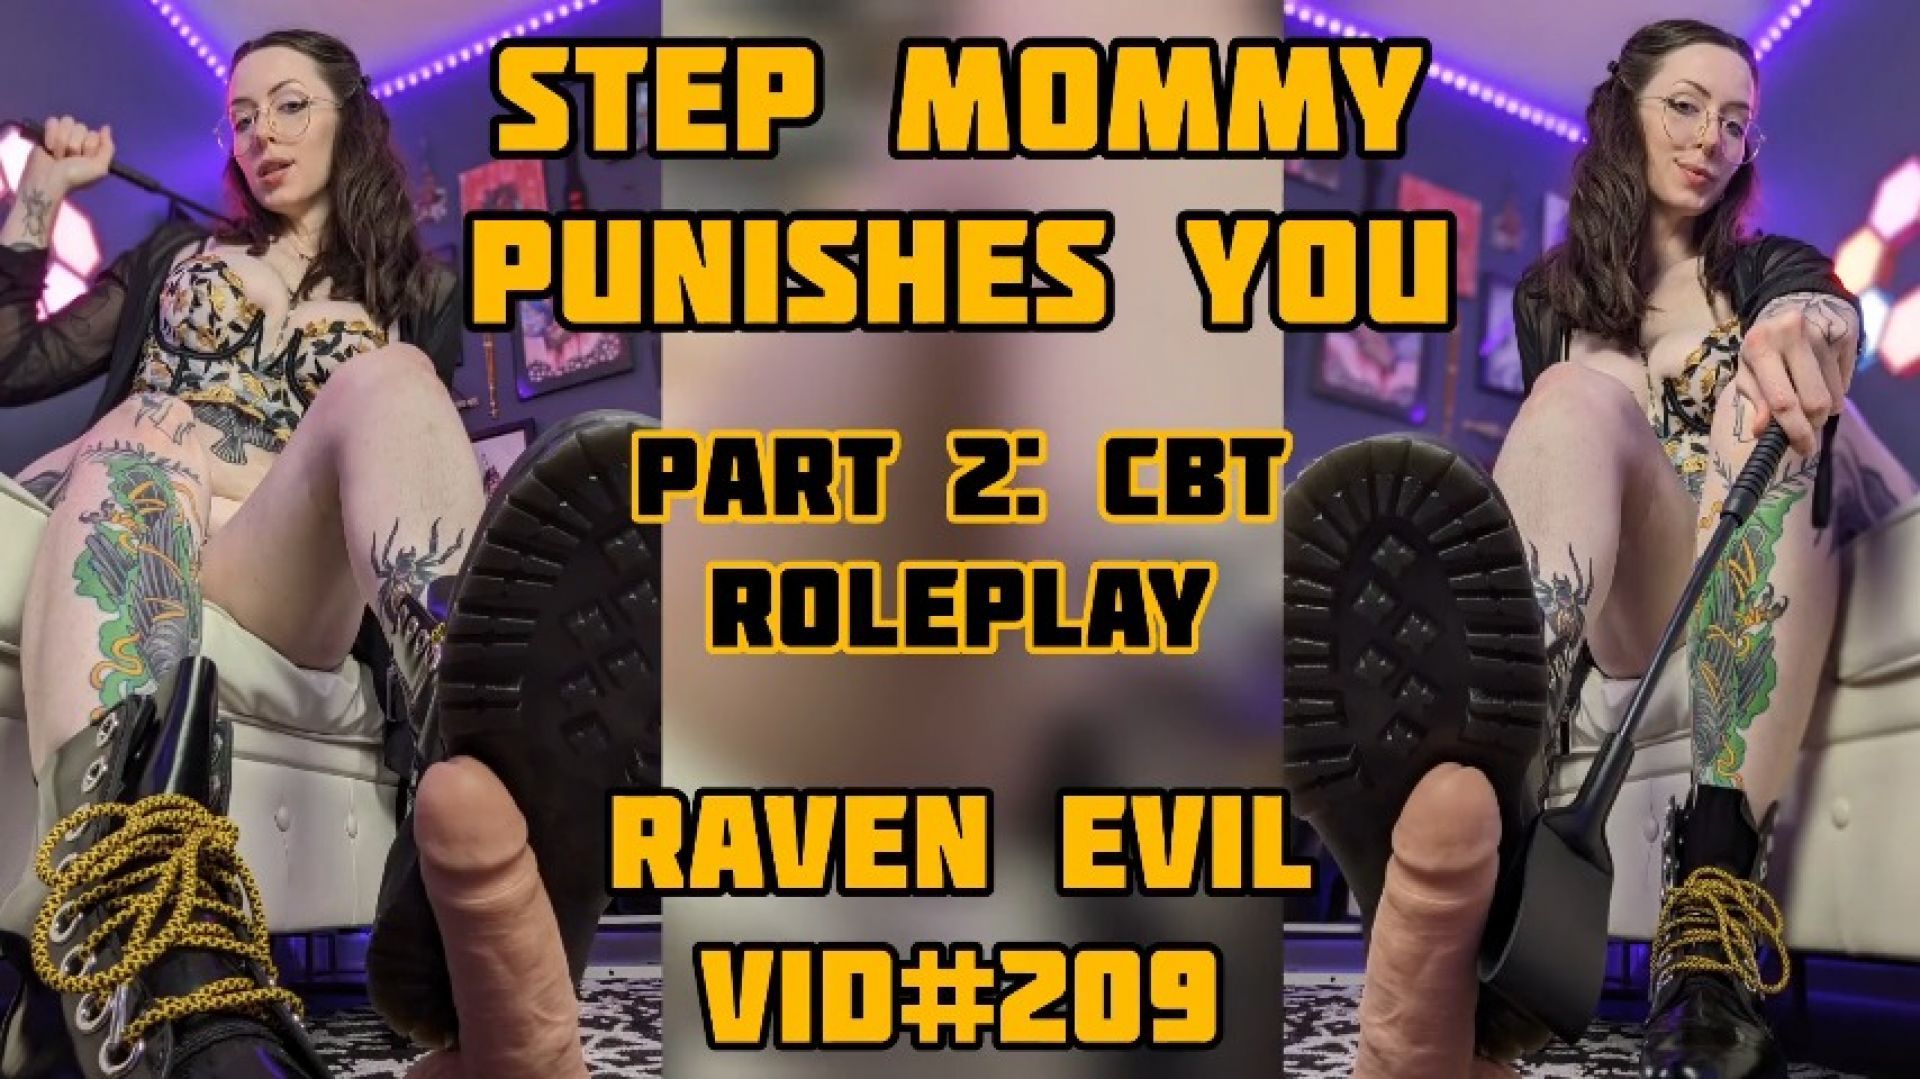 Step Mommy Punishes You 2 - CBT Roleplay